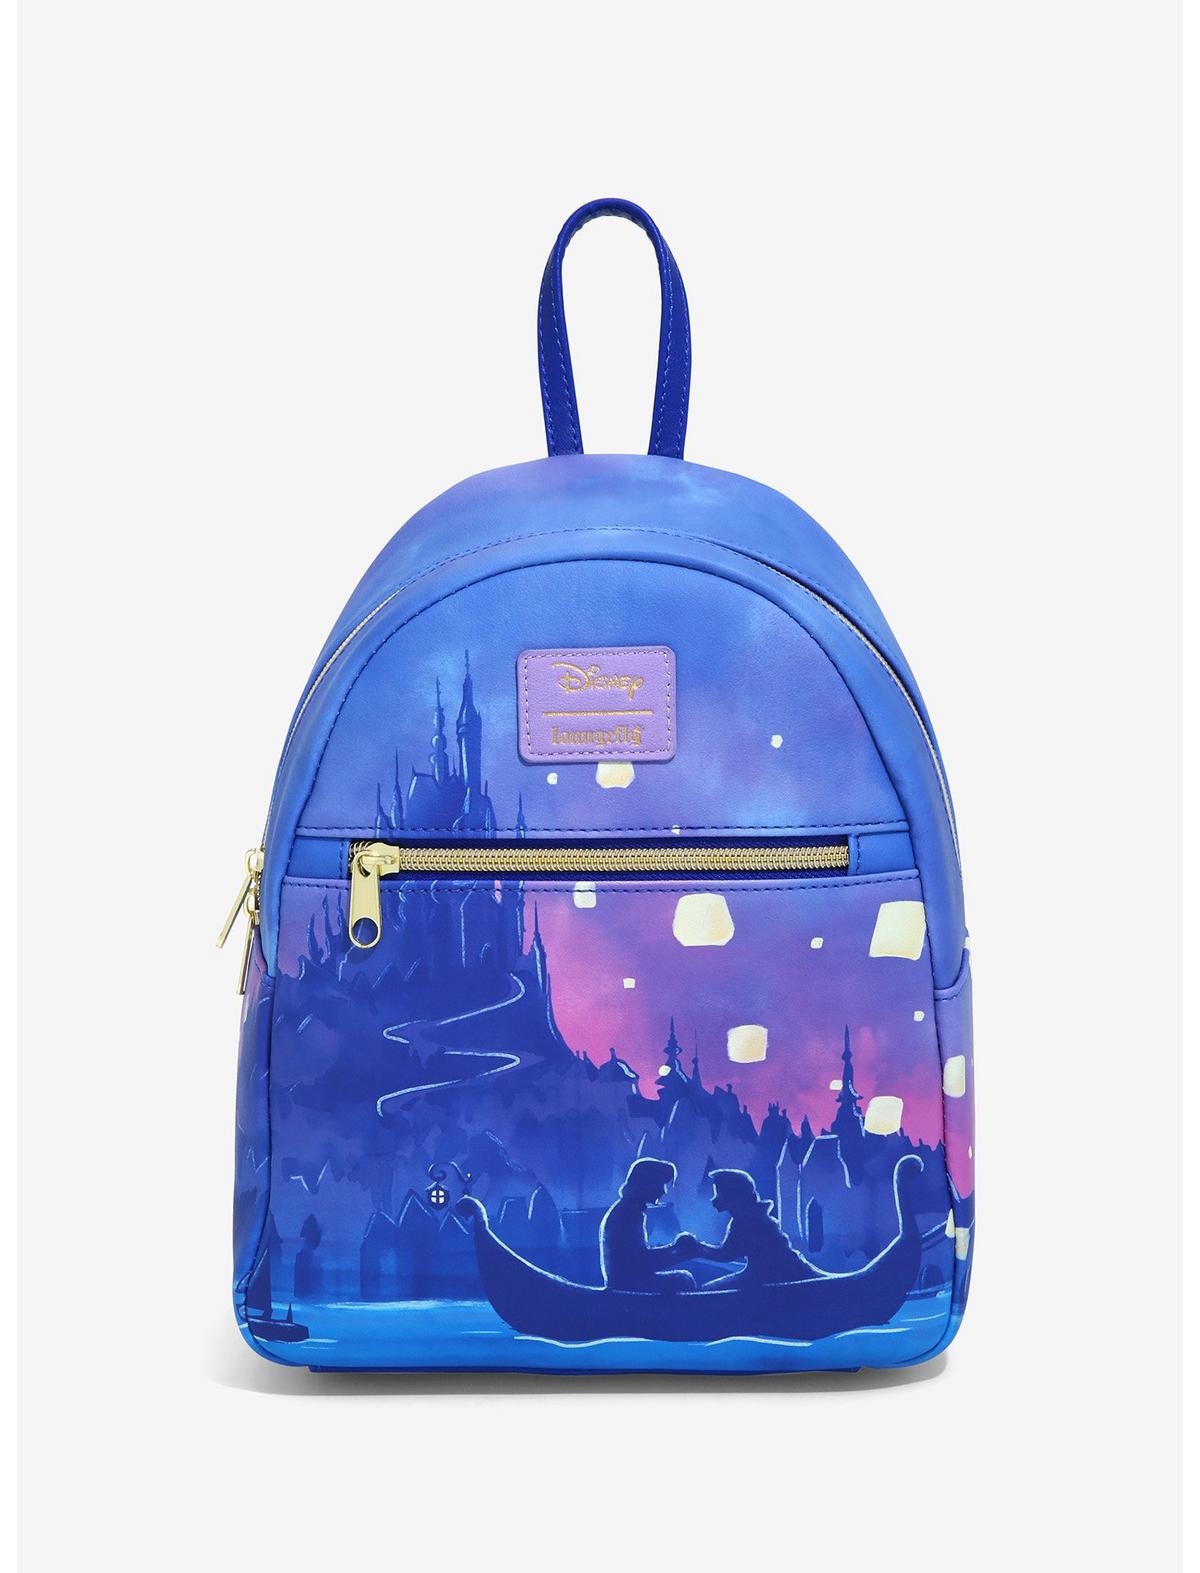 Cute Disney Loungefly Bags Available for Pre-sale at Hot Topic!